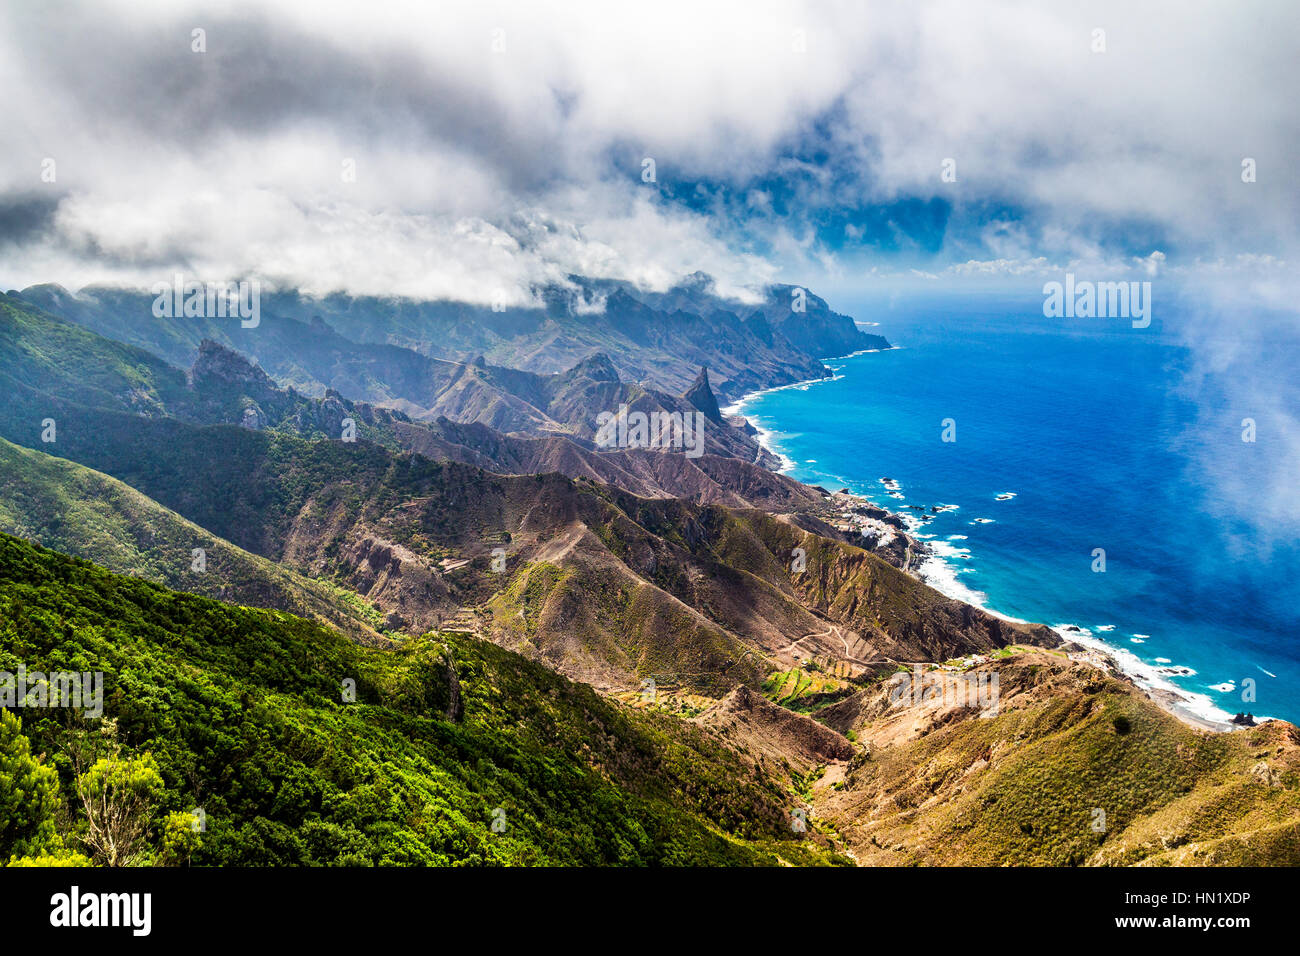 Panoramic landscape in Anaga mountains, Tenerife Canary Islands, Spain Stock Photo